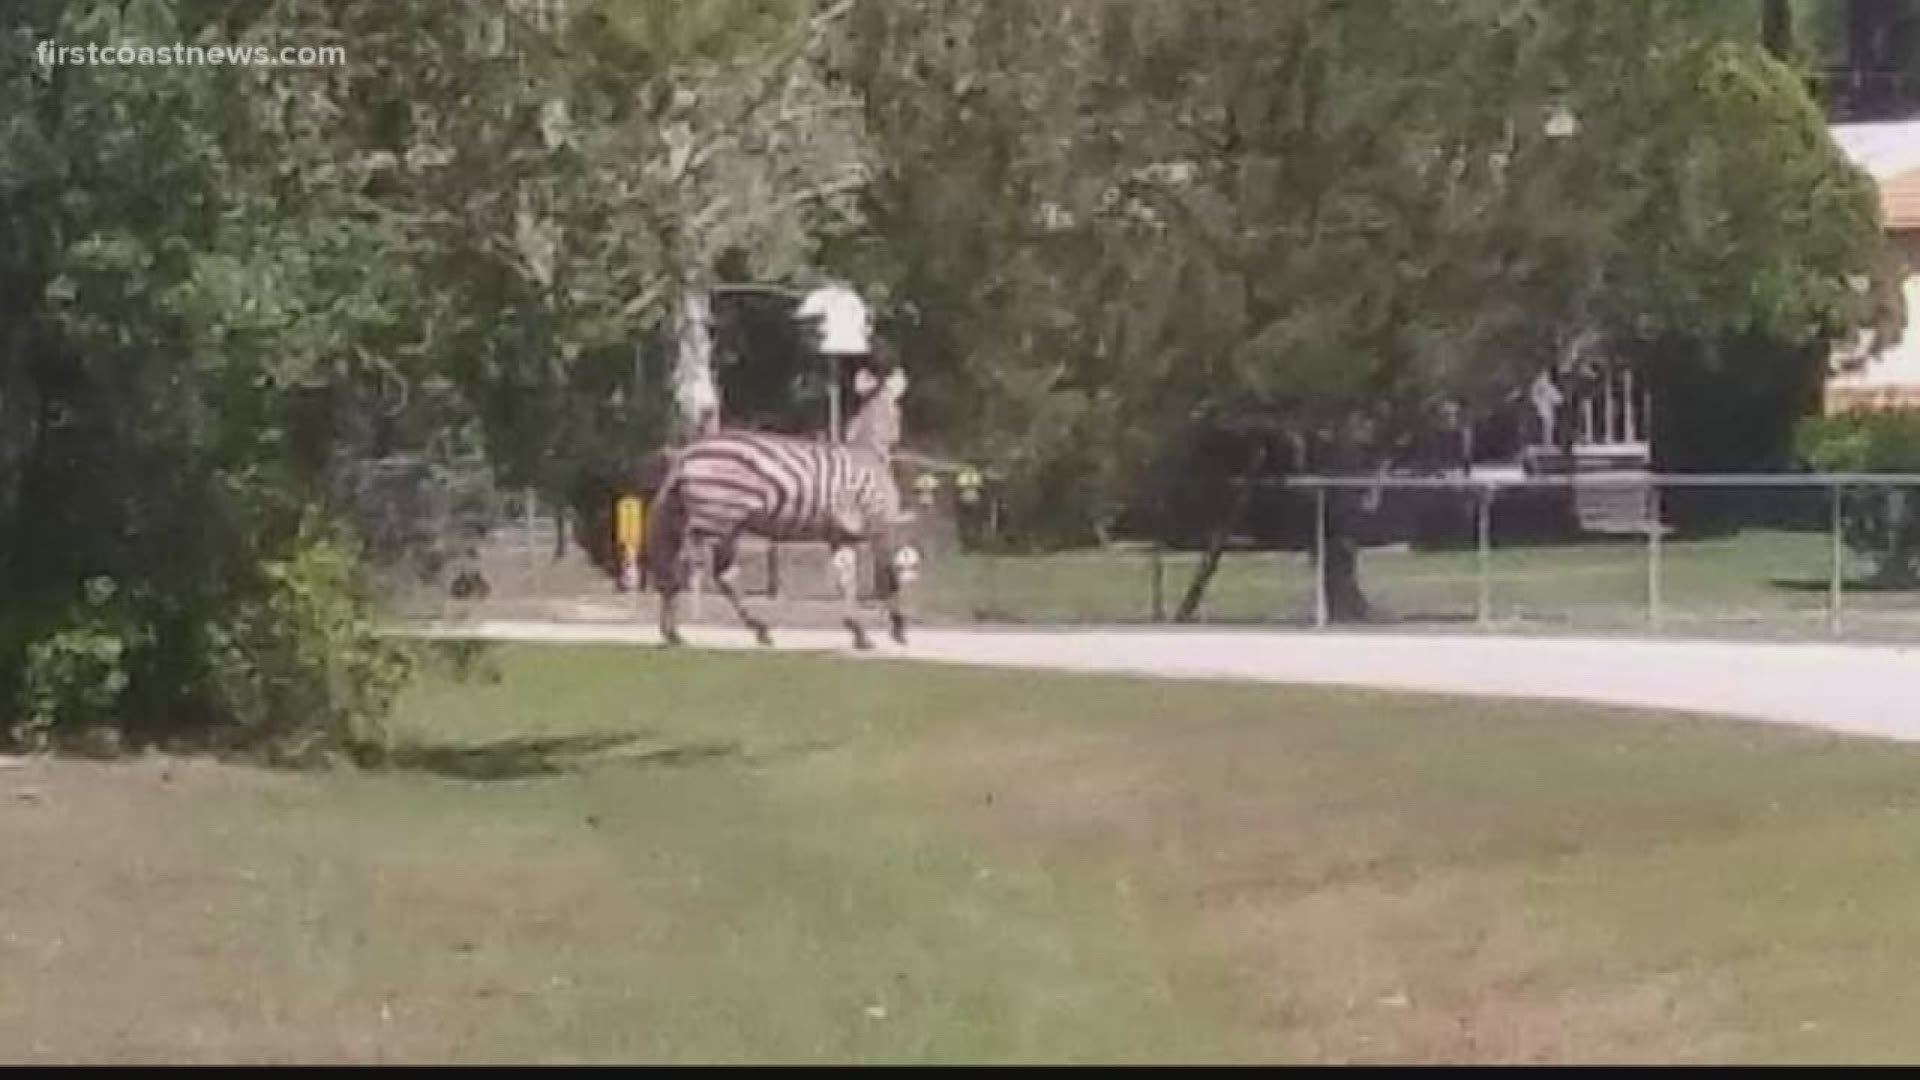 The Sheriff's Office said the zebra's owner shot and killed the animal after it became injured during its escape.